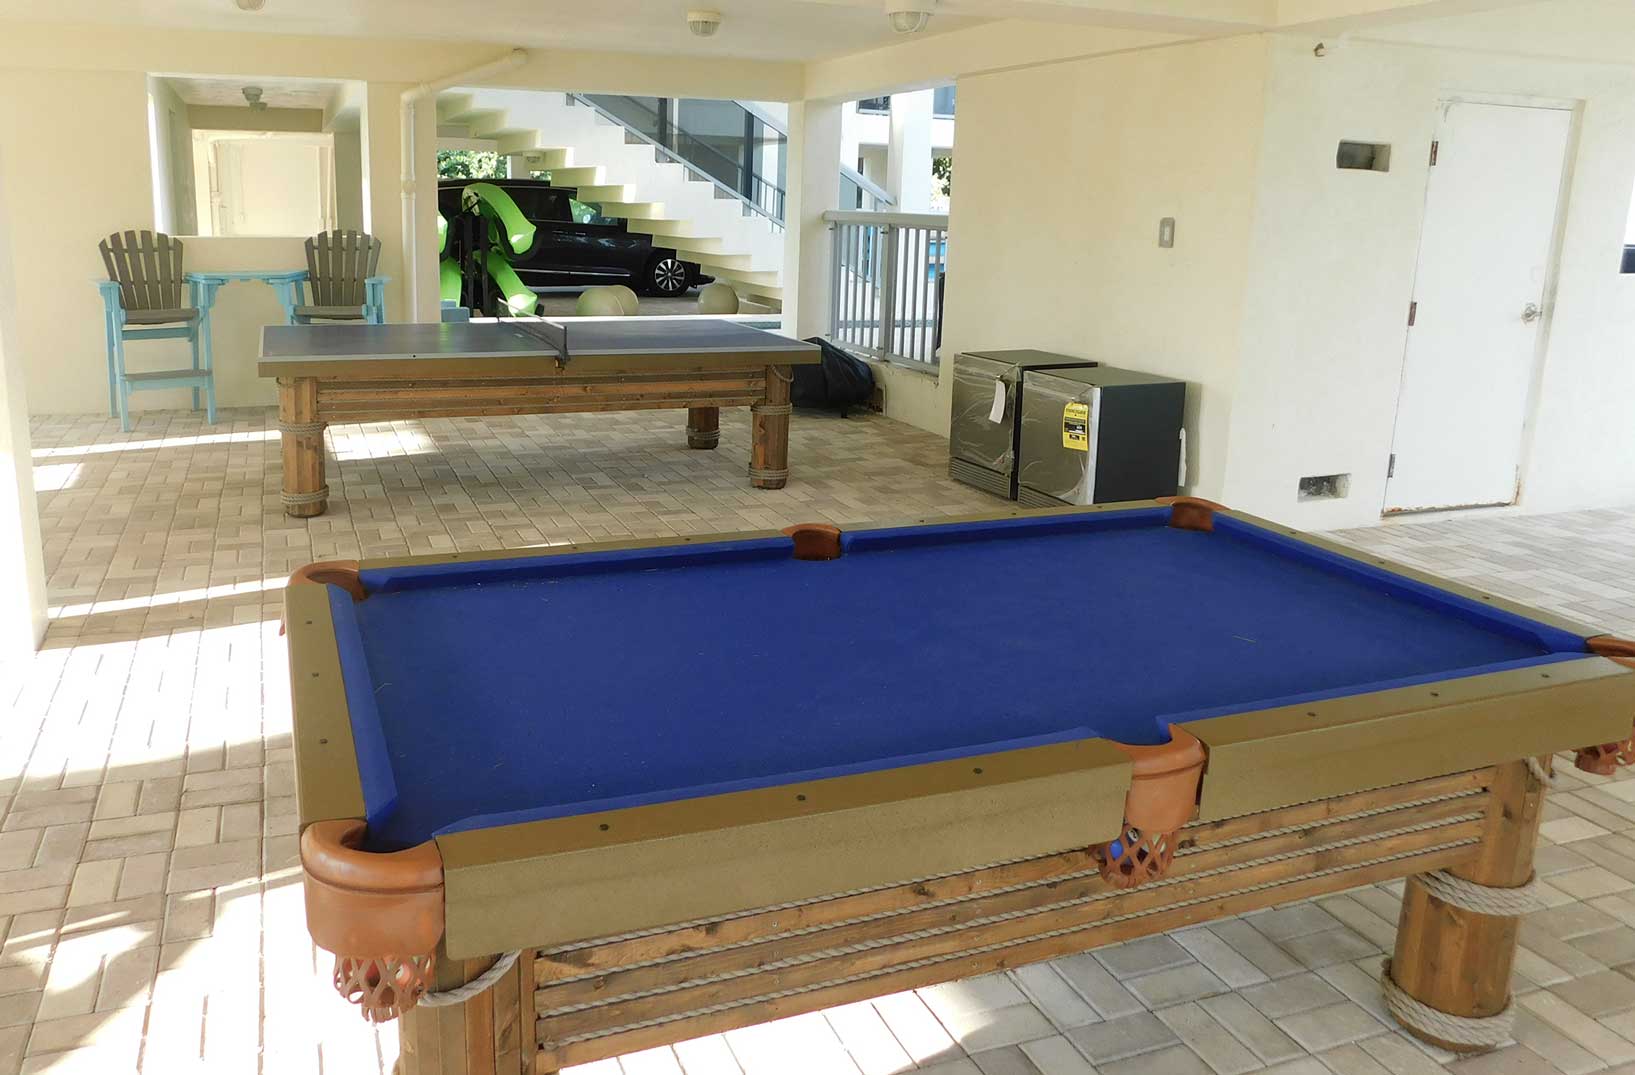 Southwest Florida home with Caribbean Outdoor Pool Table and Caribbean Outdoor Table Tennis Table from R&R Outdoors All Weather Billiards